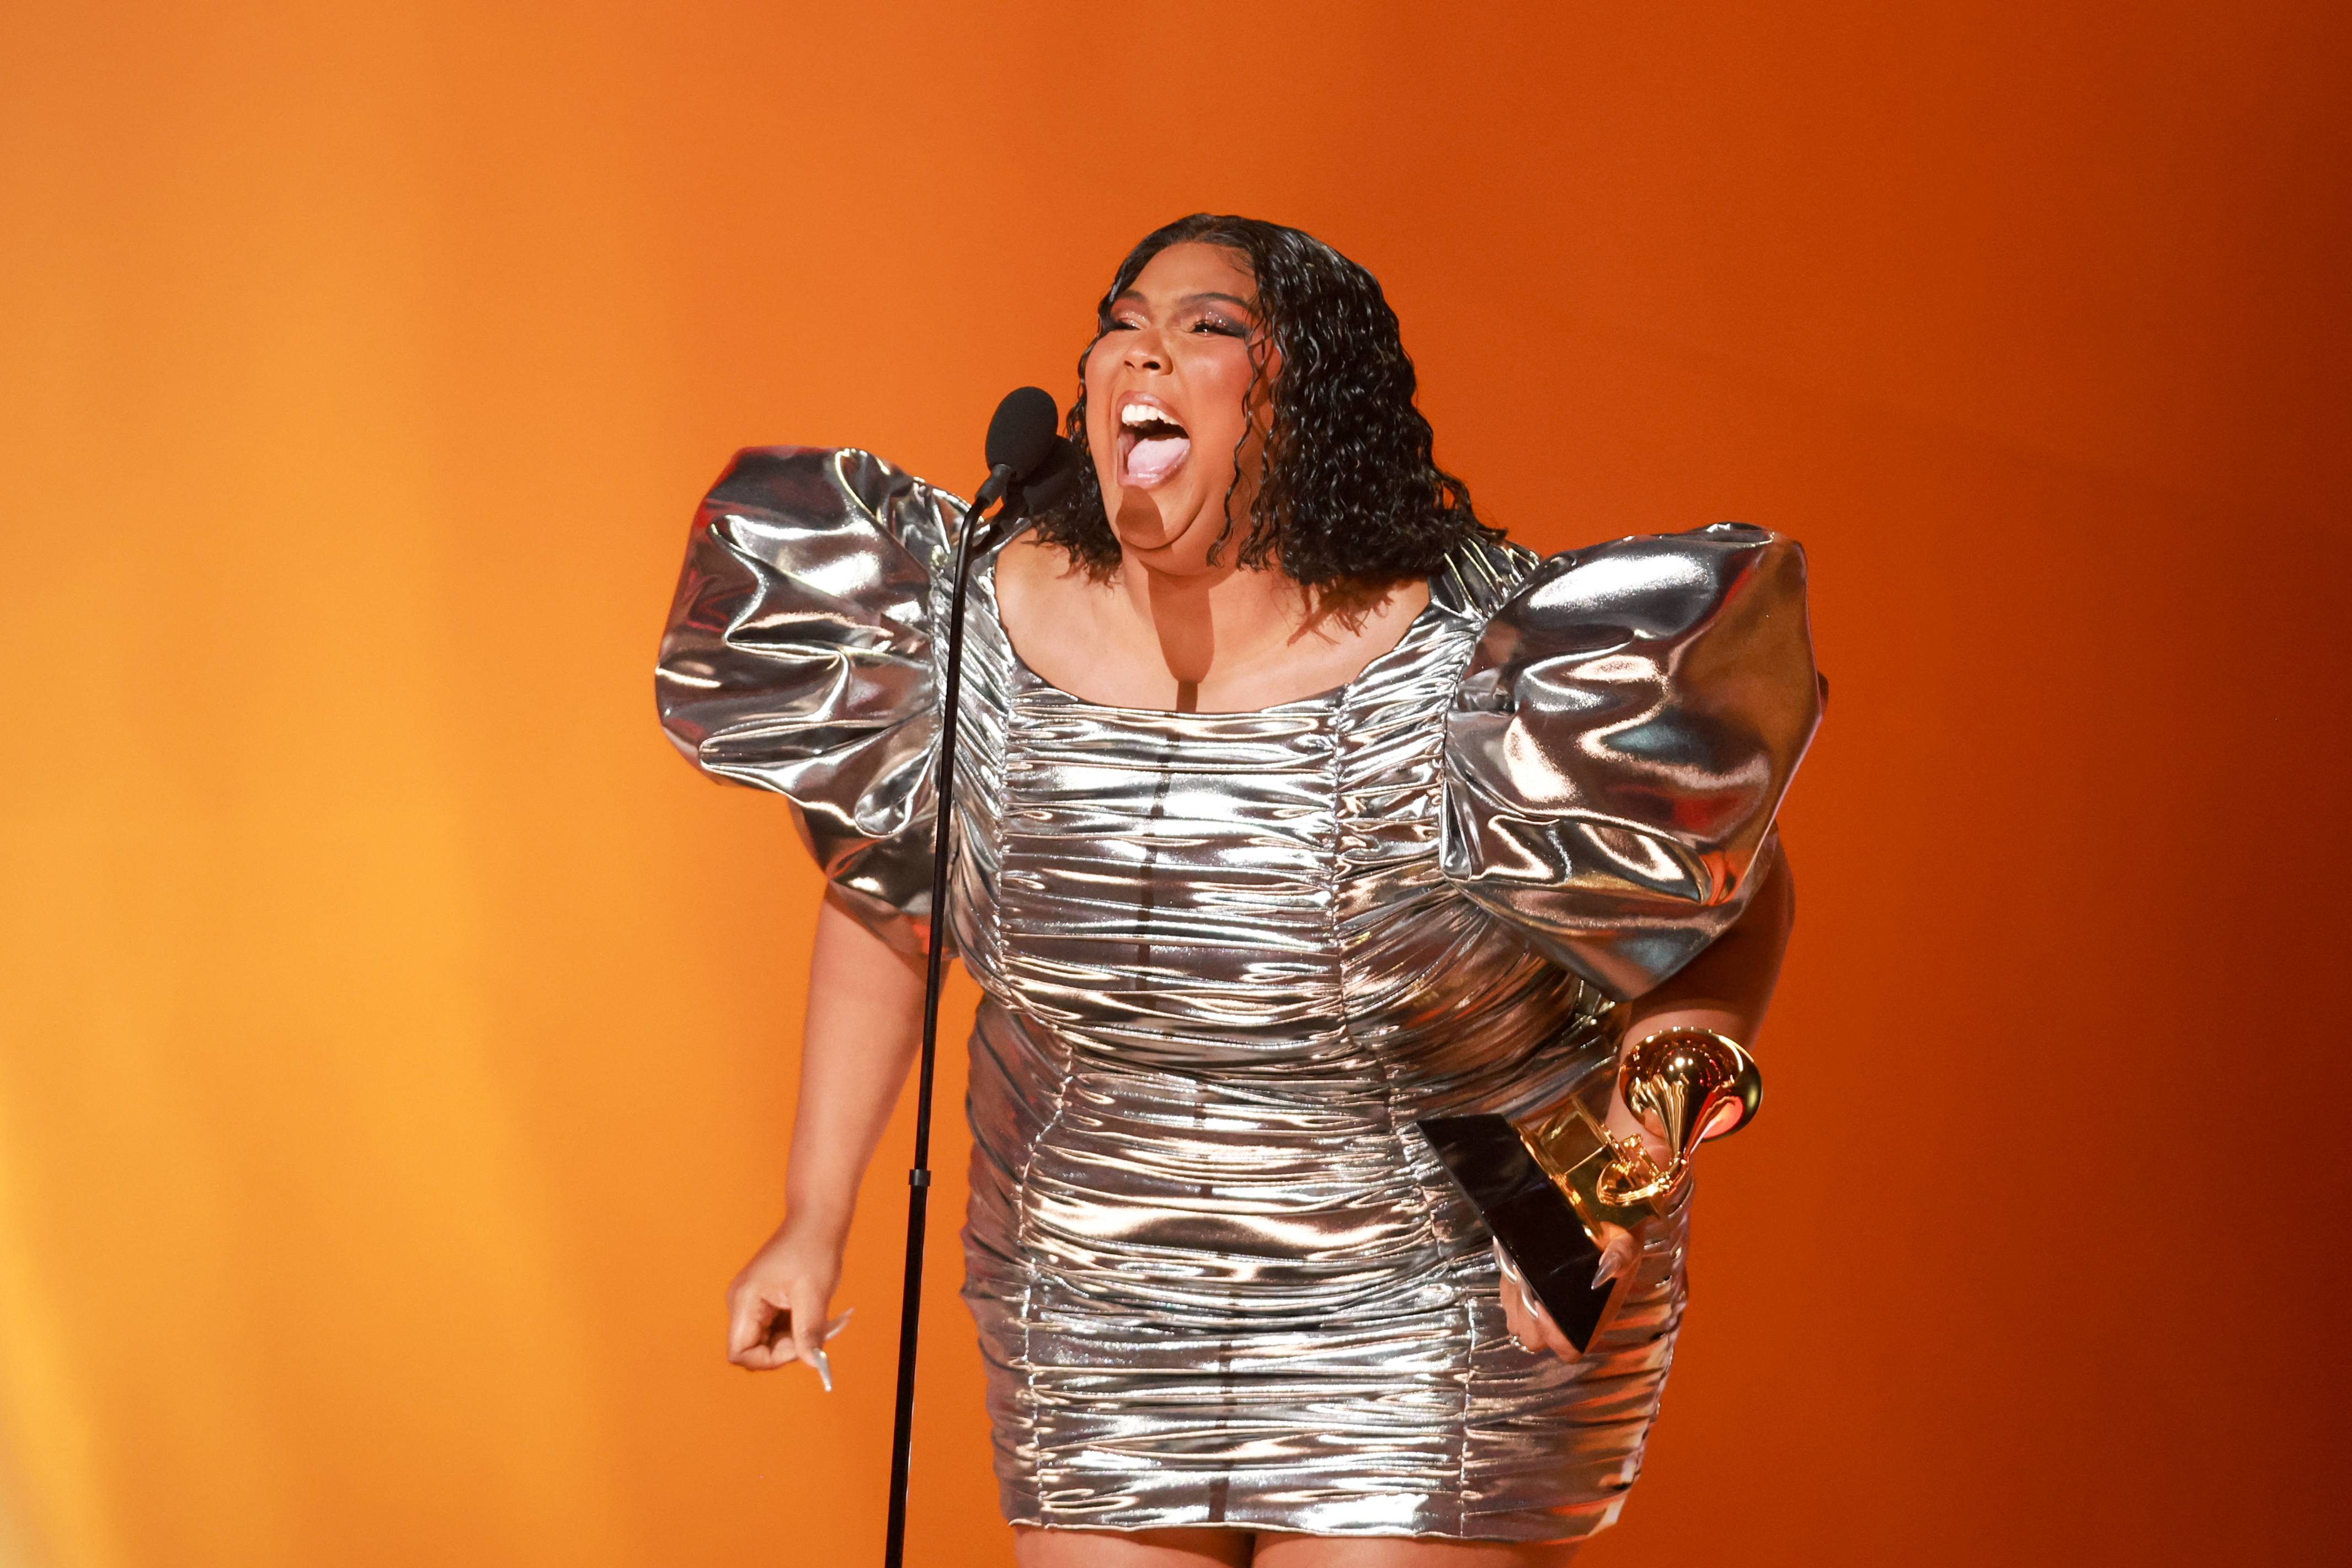 Lizzo at the 65th Annual GRAMMY Awards held at Crypto.com Arena on February 5, 2023 in Los Angeles, California